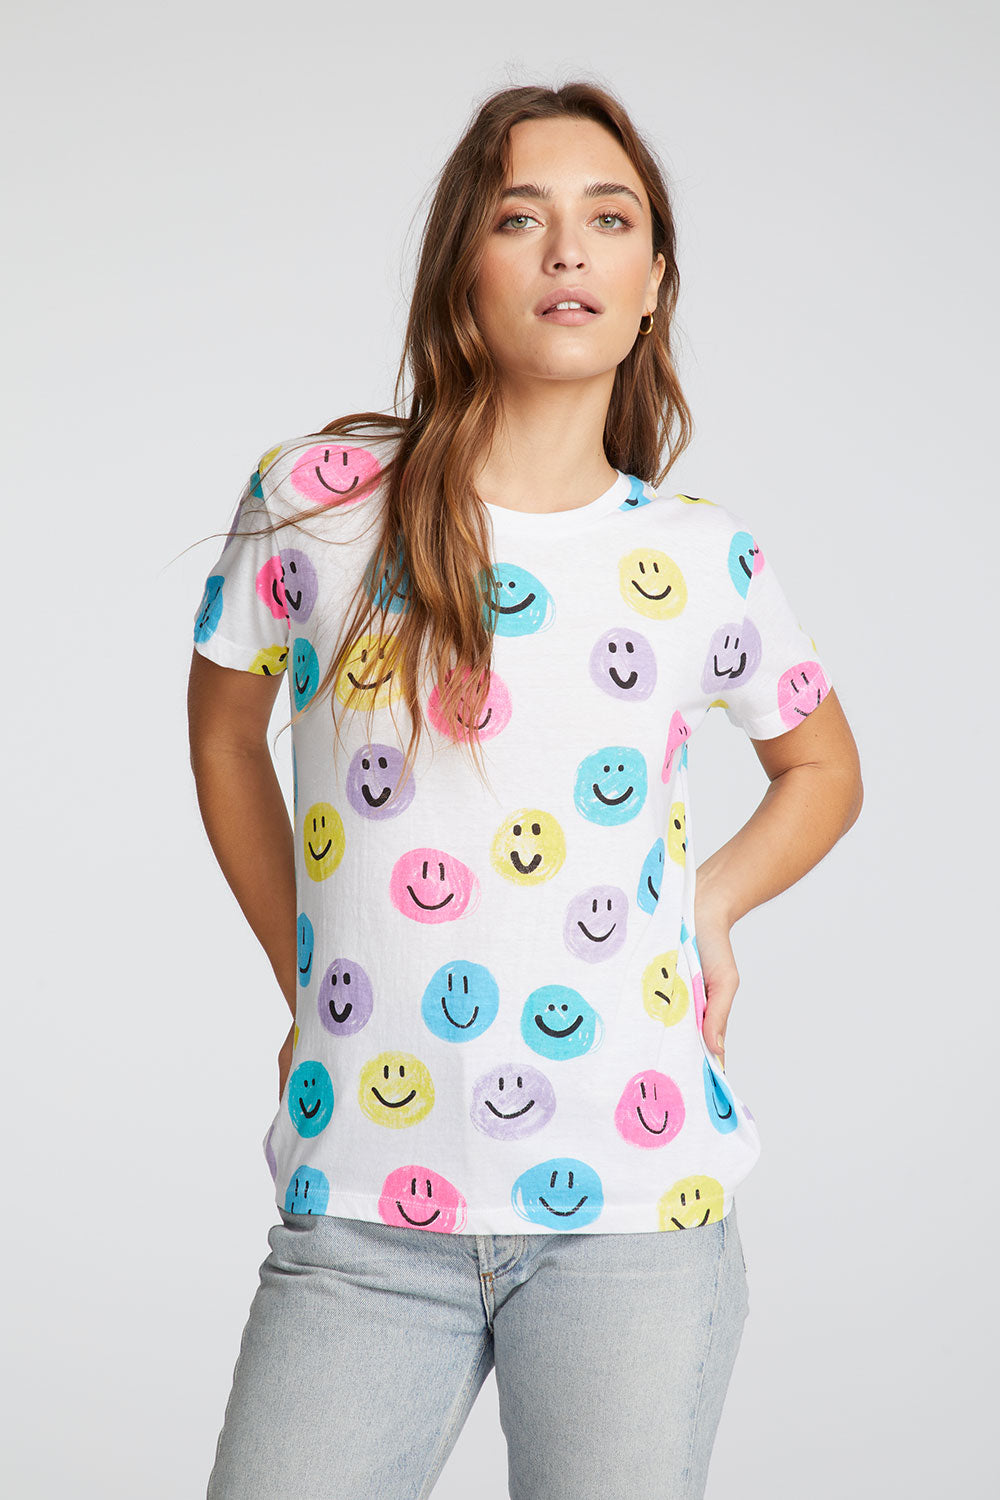 Smiles And Smiles WOMENS chaserbrand